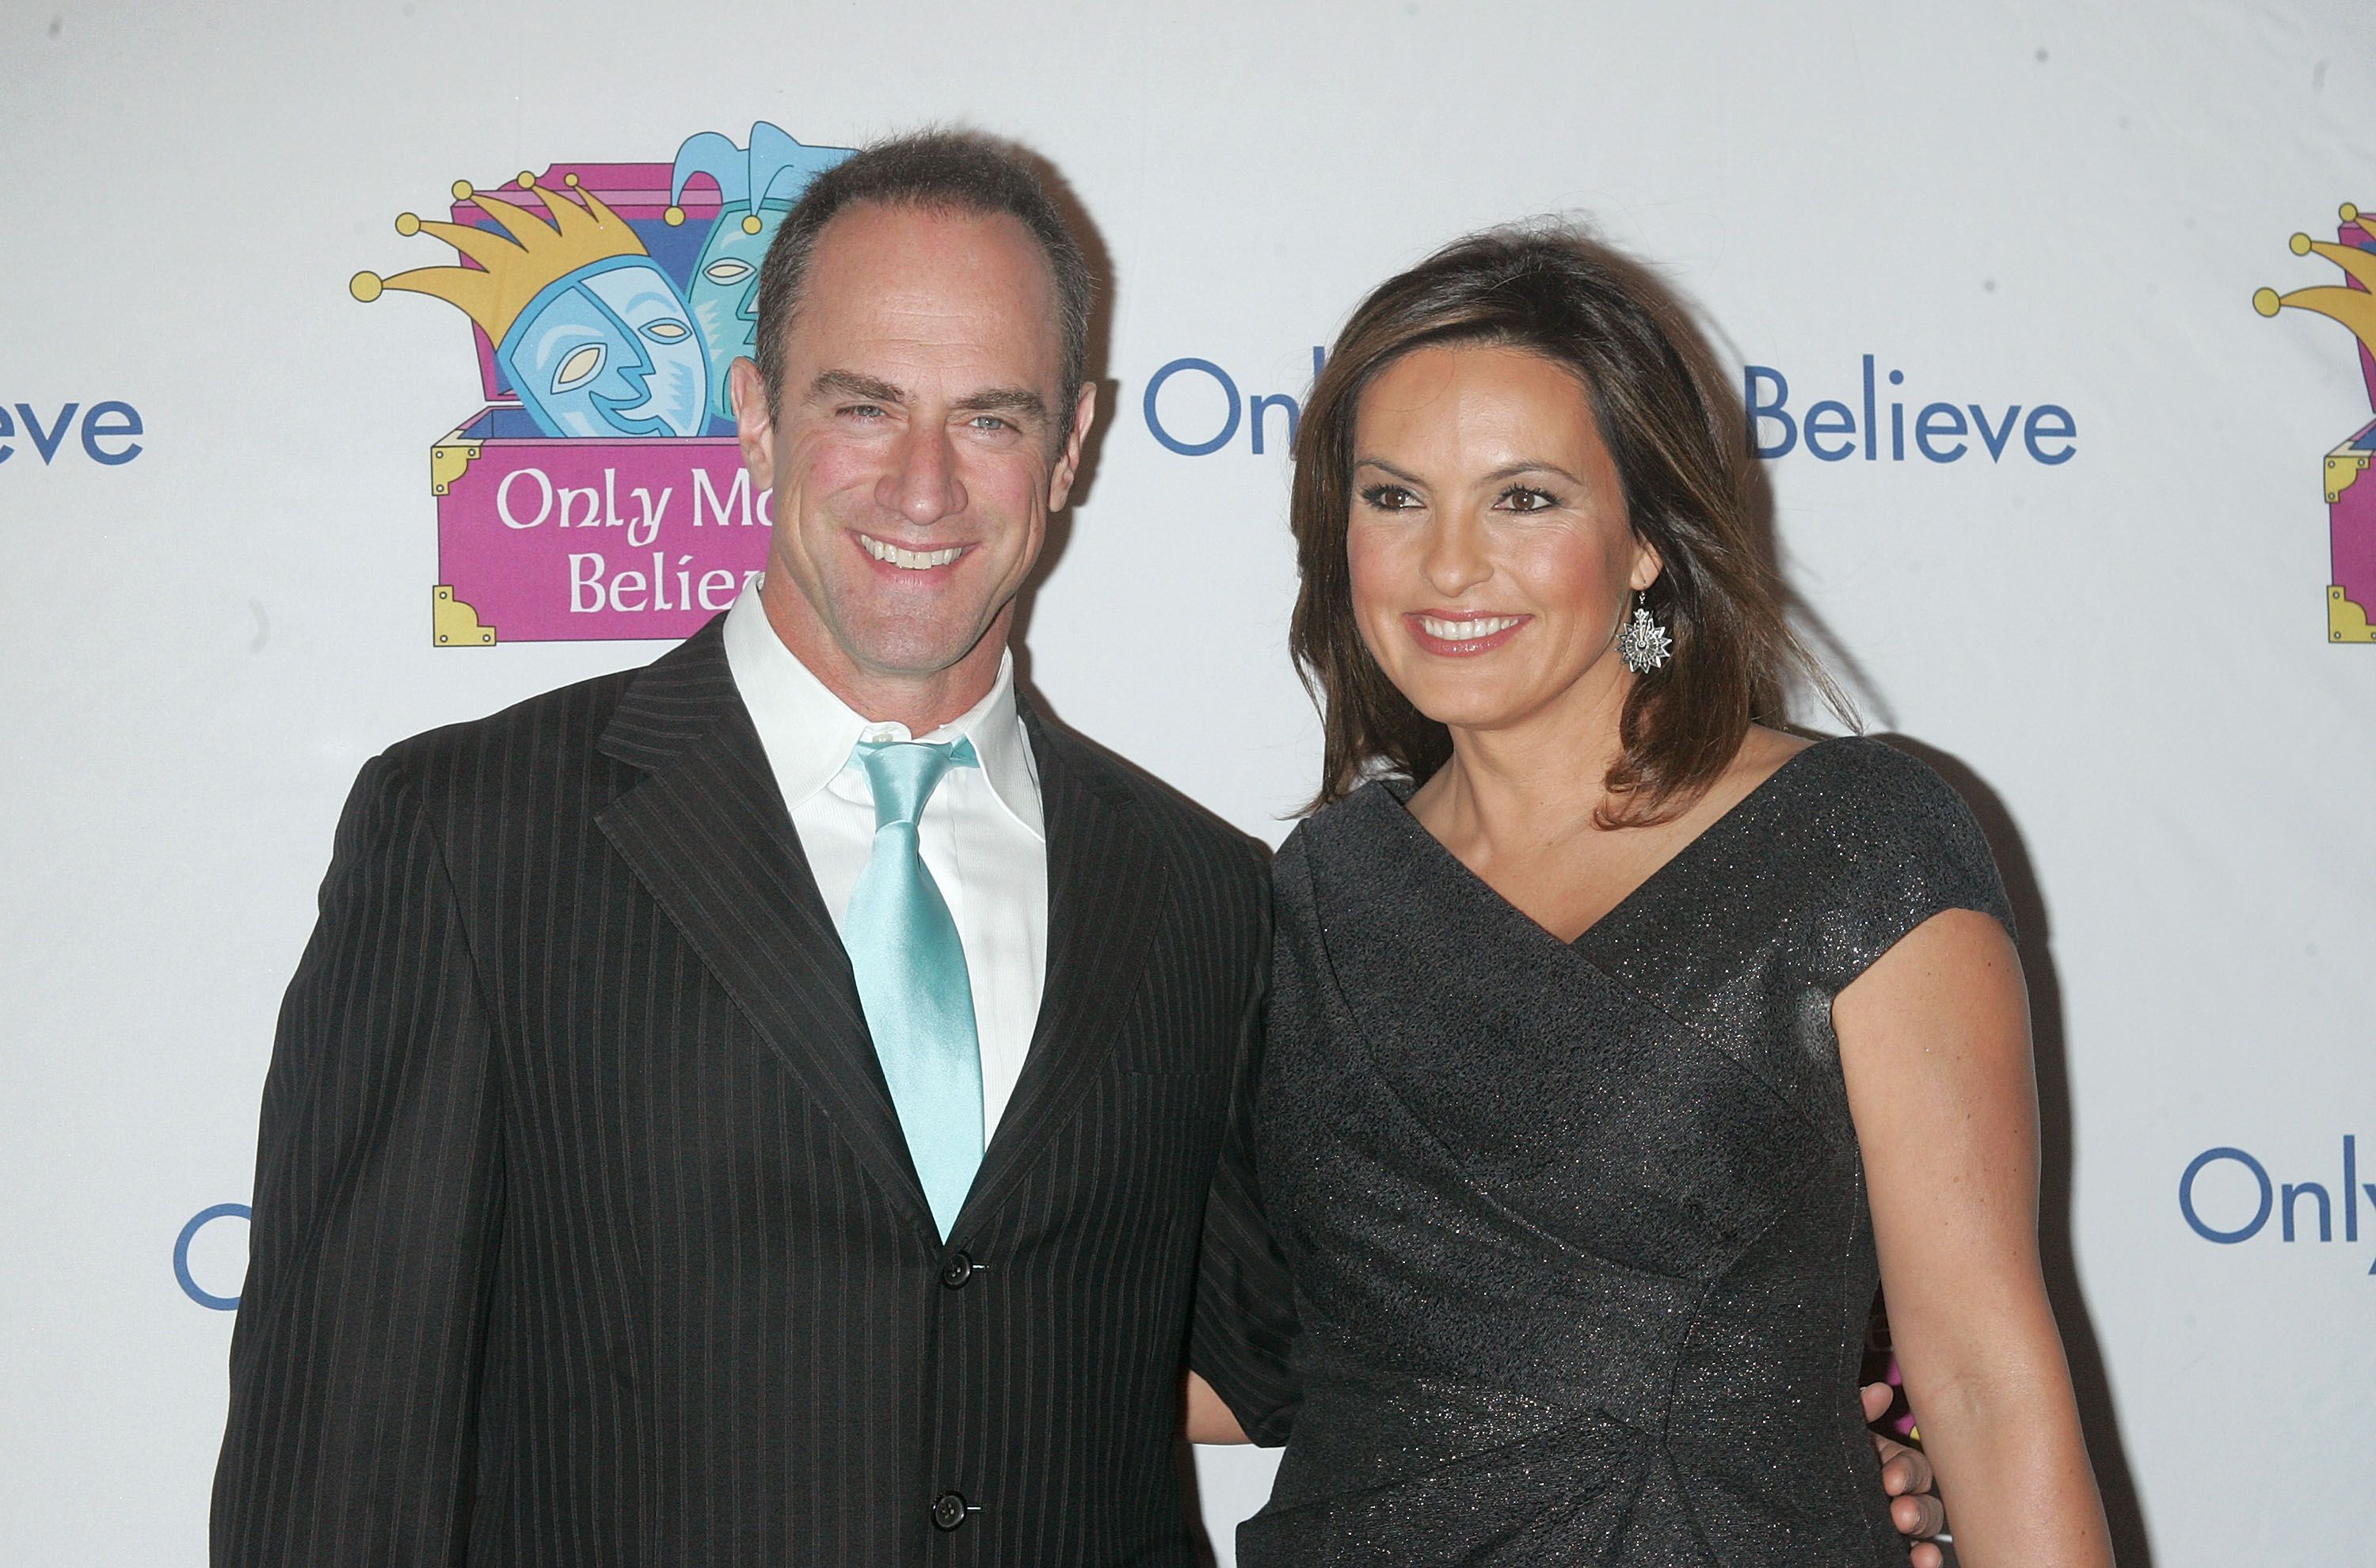 Chris Meloni and Mariska Hargitay at the 12th Annual Make Believe on Broadway gala at the Shubert Theatre on November 14, 2011, in New York City | Photo: Jim Spellman/WireImage/Getty Images